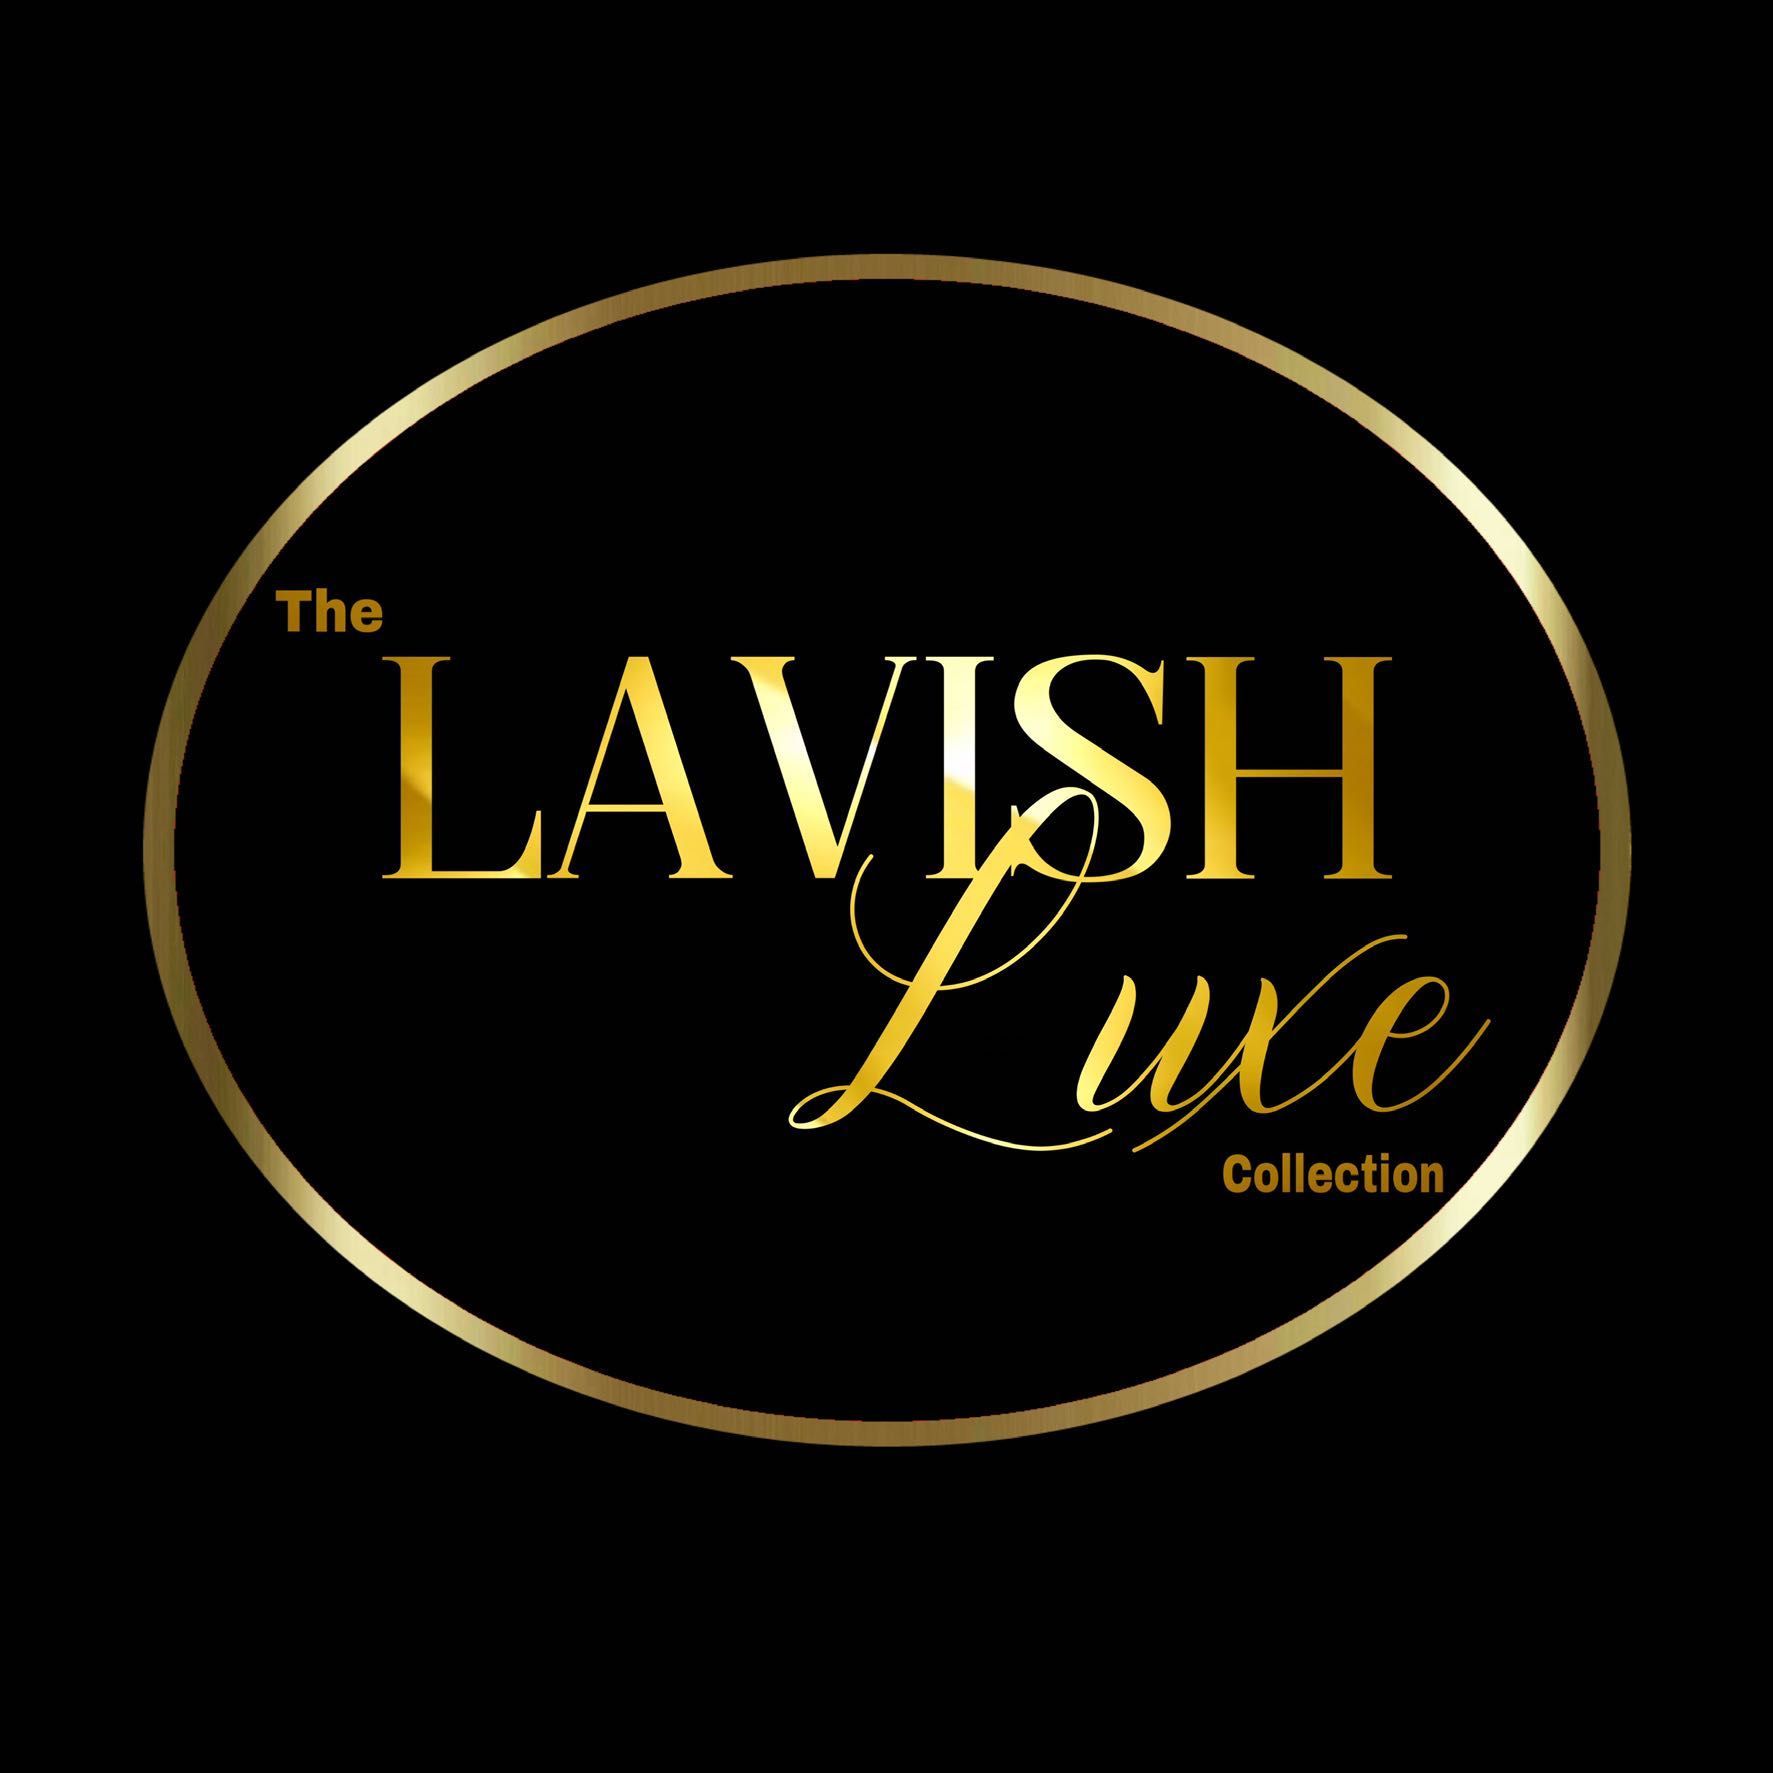 The Lavish Luxe Collection, 17300 El Camino Real, Webster, 77058